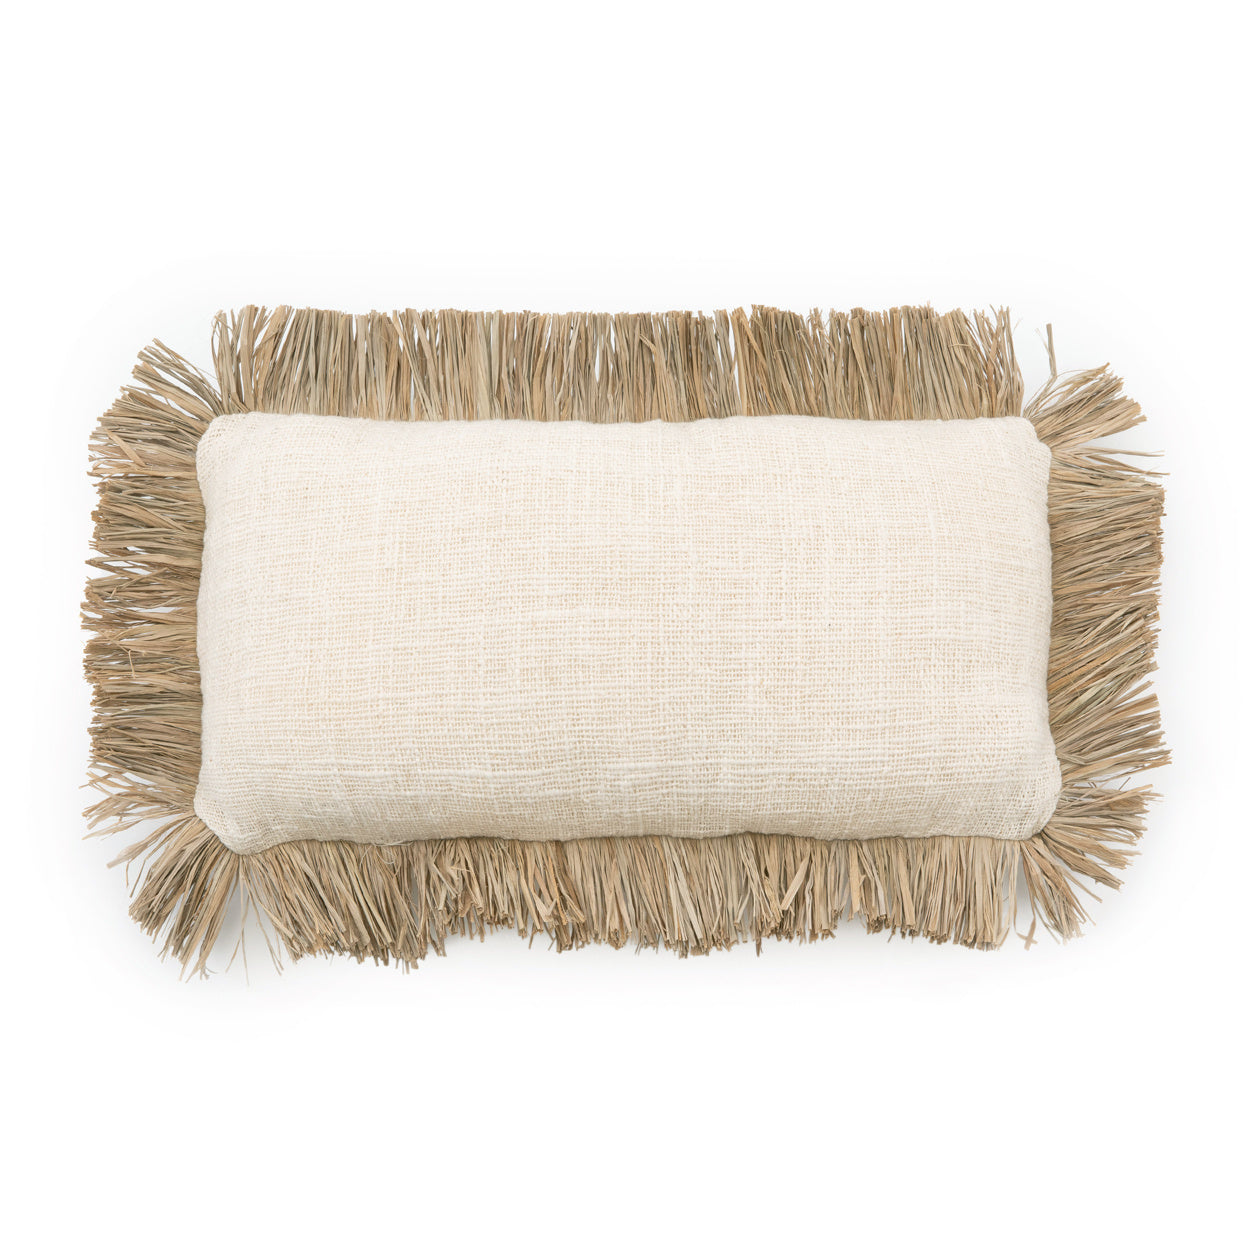 THE SAINT TROPEZ Cushion Cover Natural-White 30x50 front view